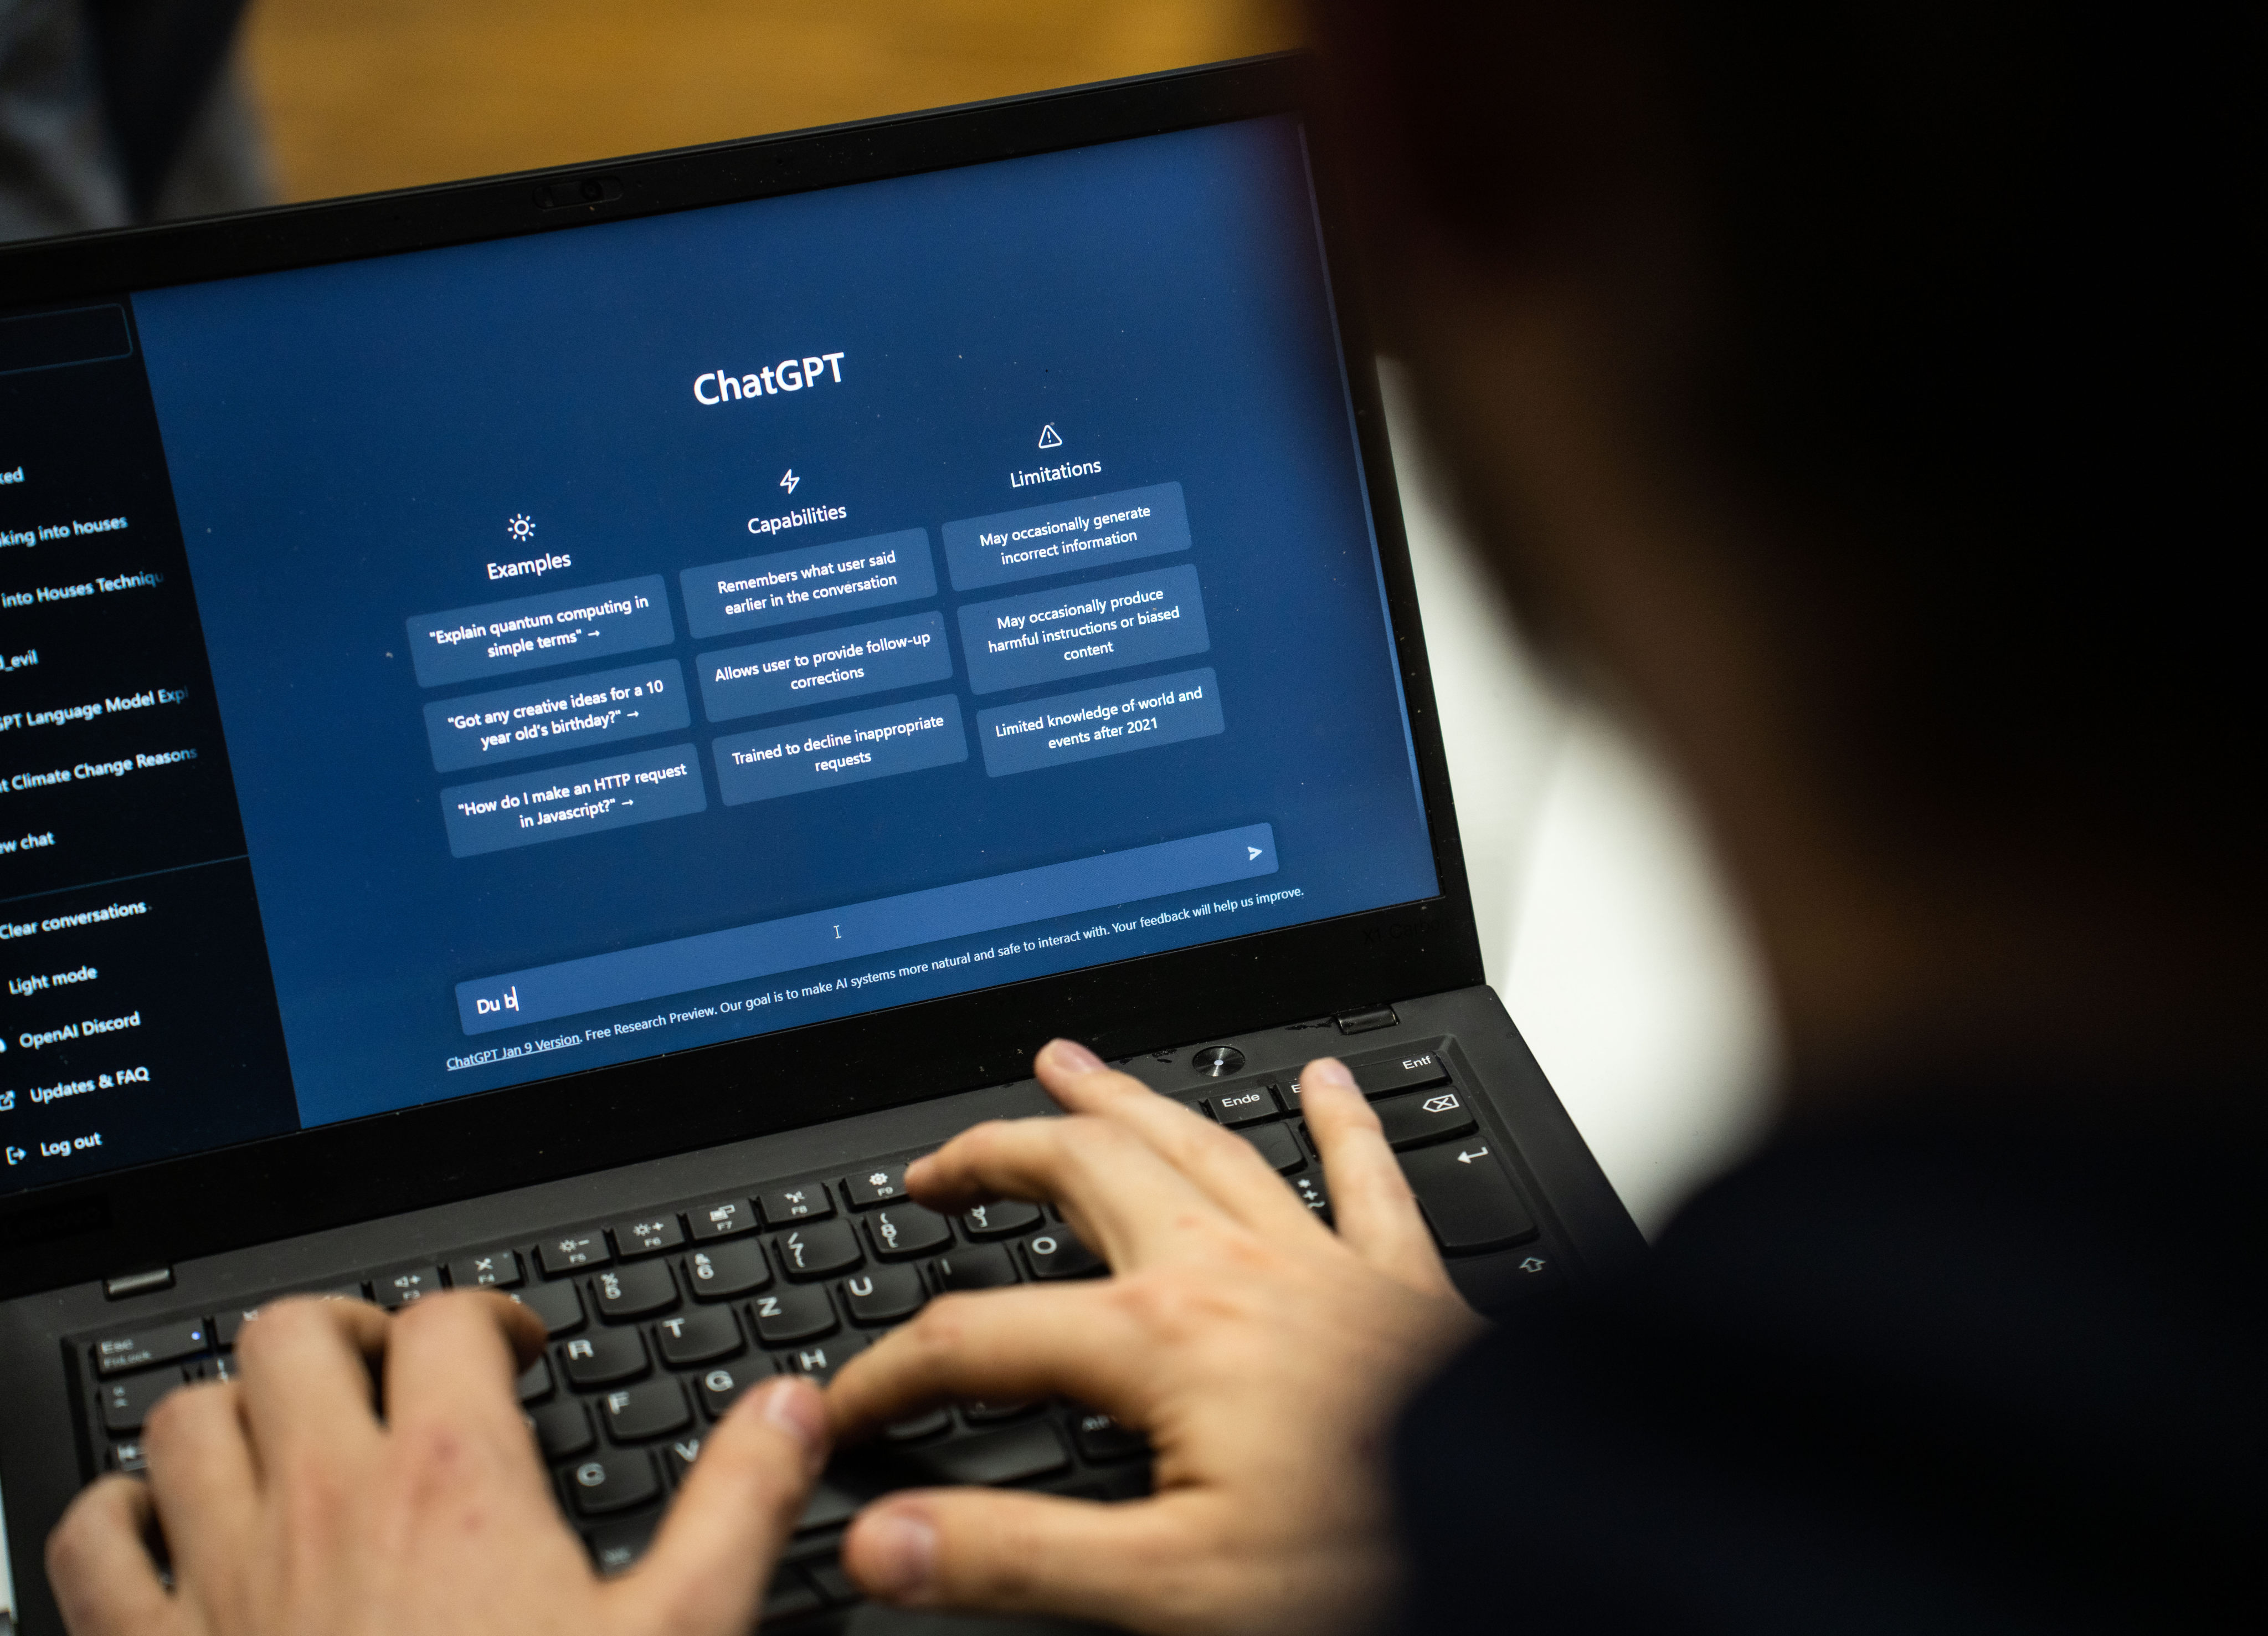 A person uses ChatGPT developed by OpenAI. 
New skills are needed to use new AI tools like ChatGPT, such as writing effective prompts. Photo: dpa